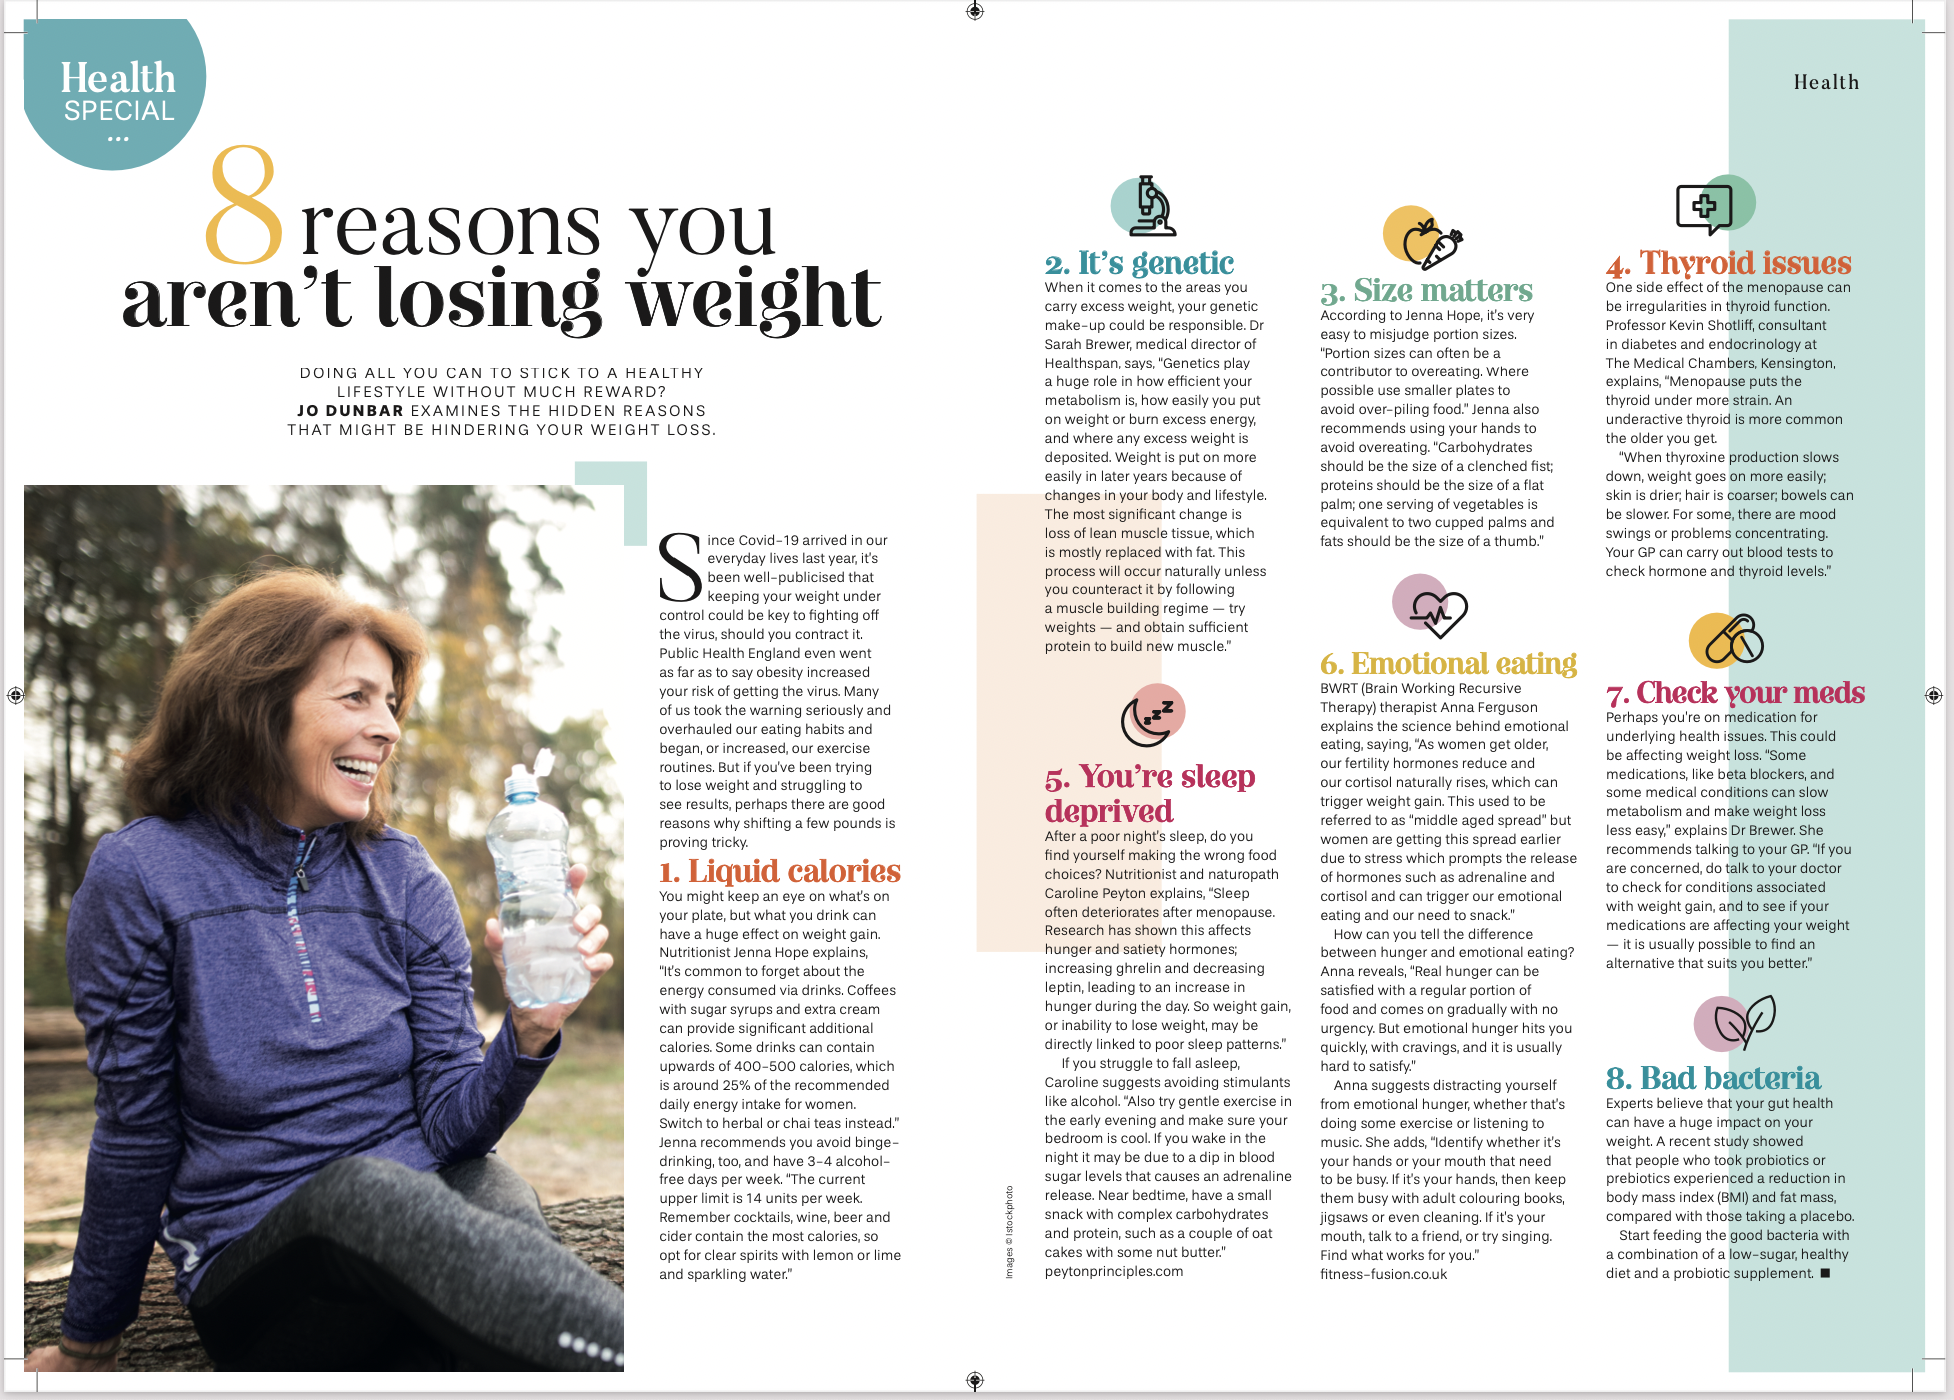 8 reasons you aren't losing weight